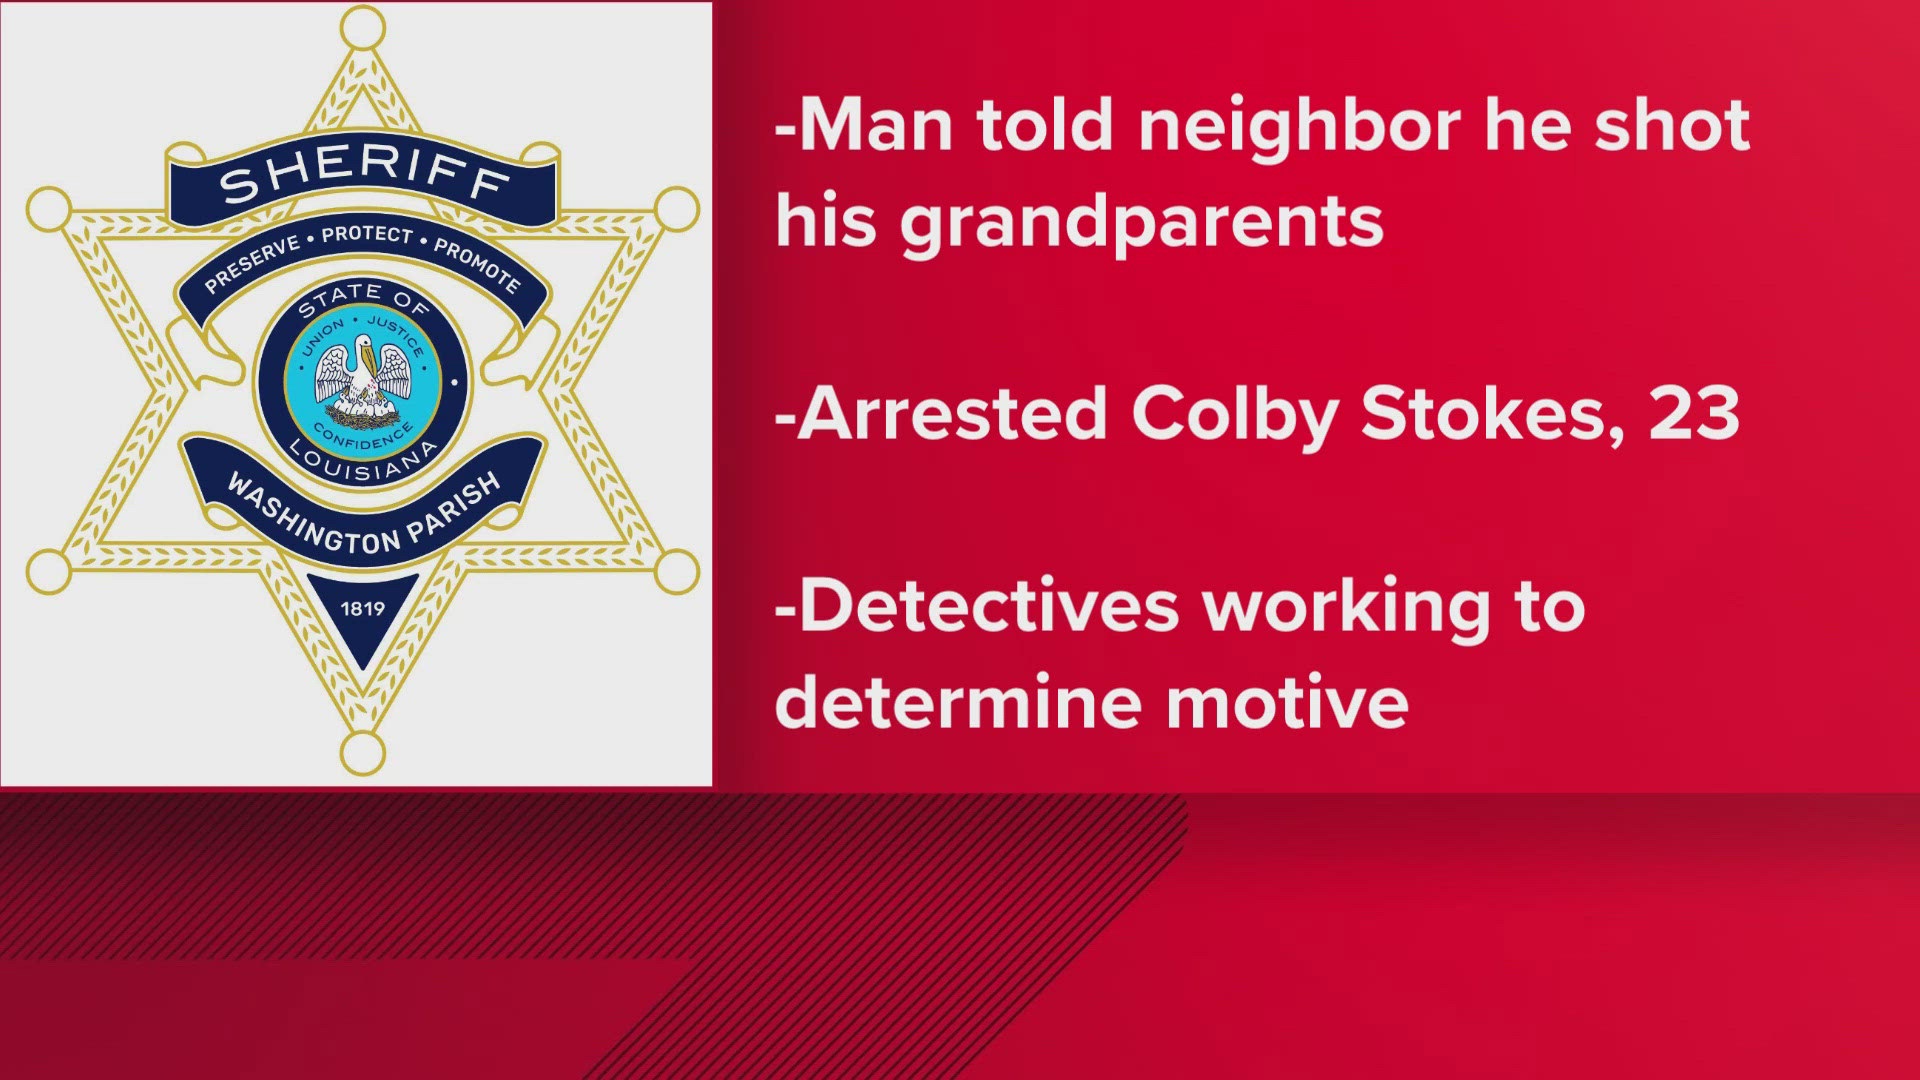 Colby Stokes, 23 was arrested. Deputies found the two victims and took Stokes into custody.